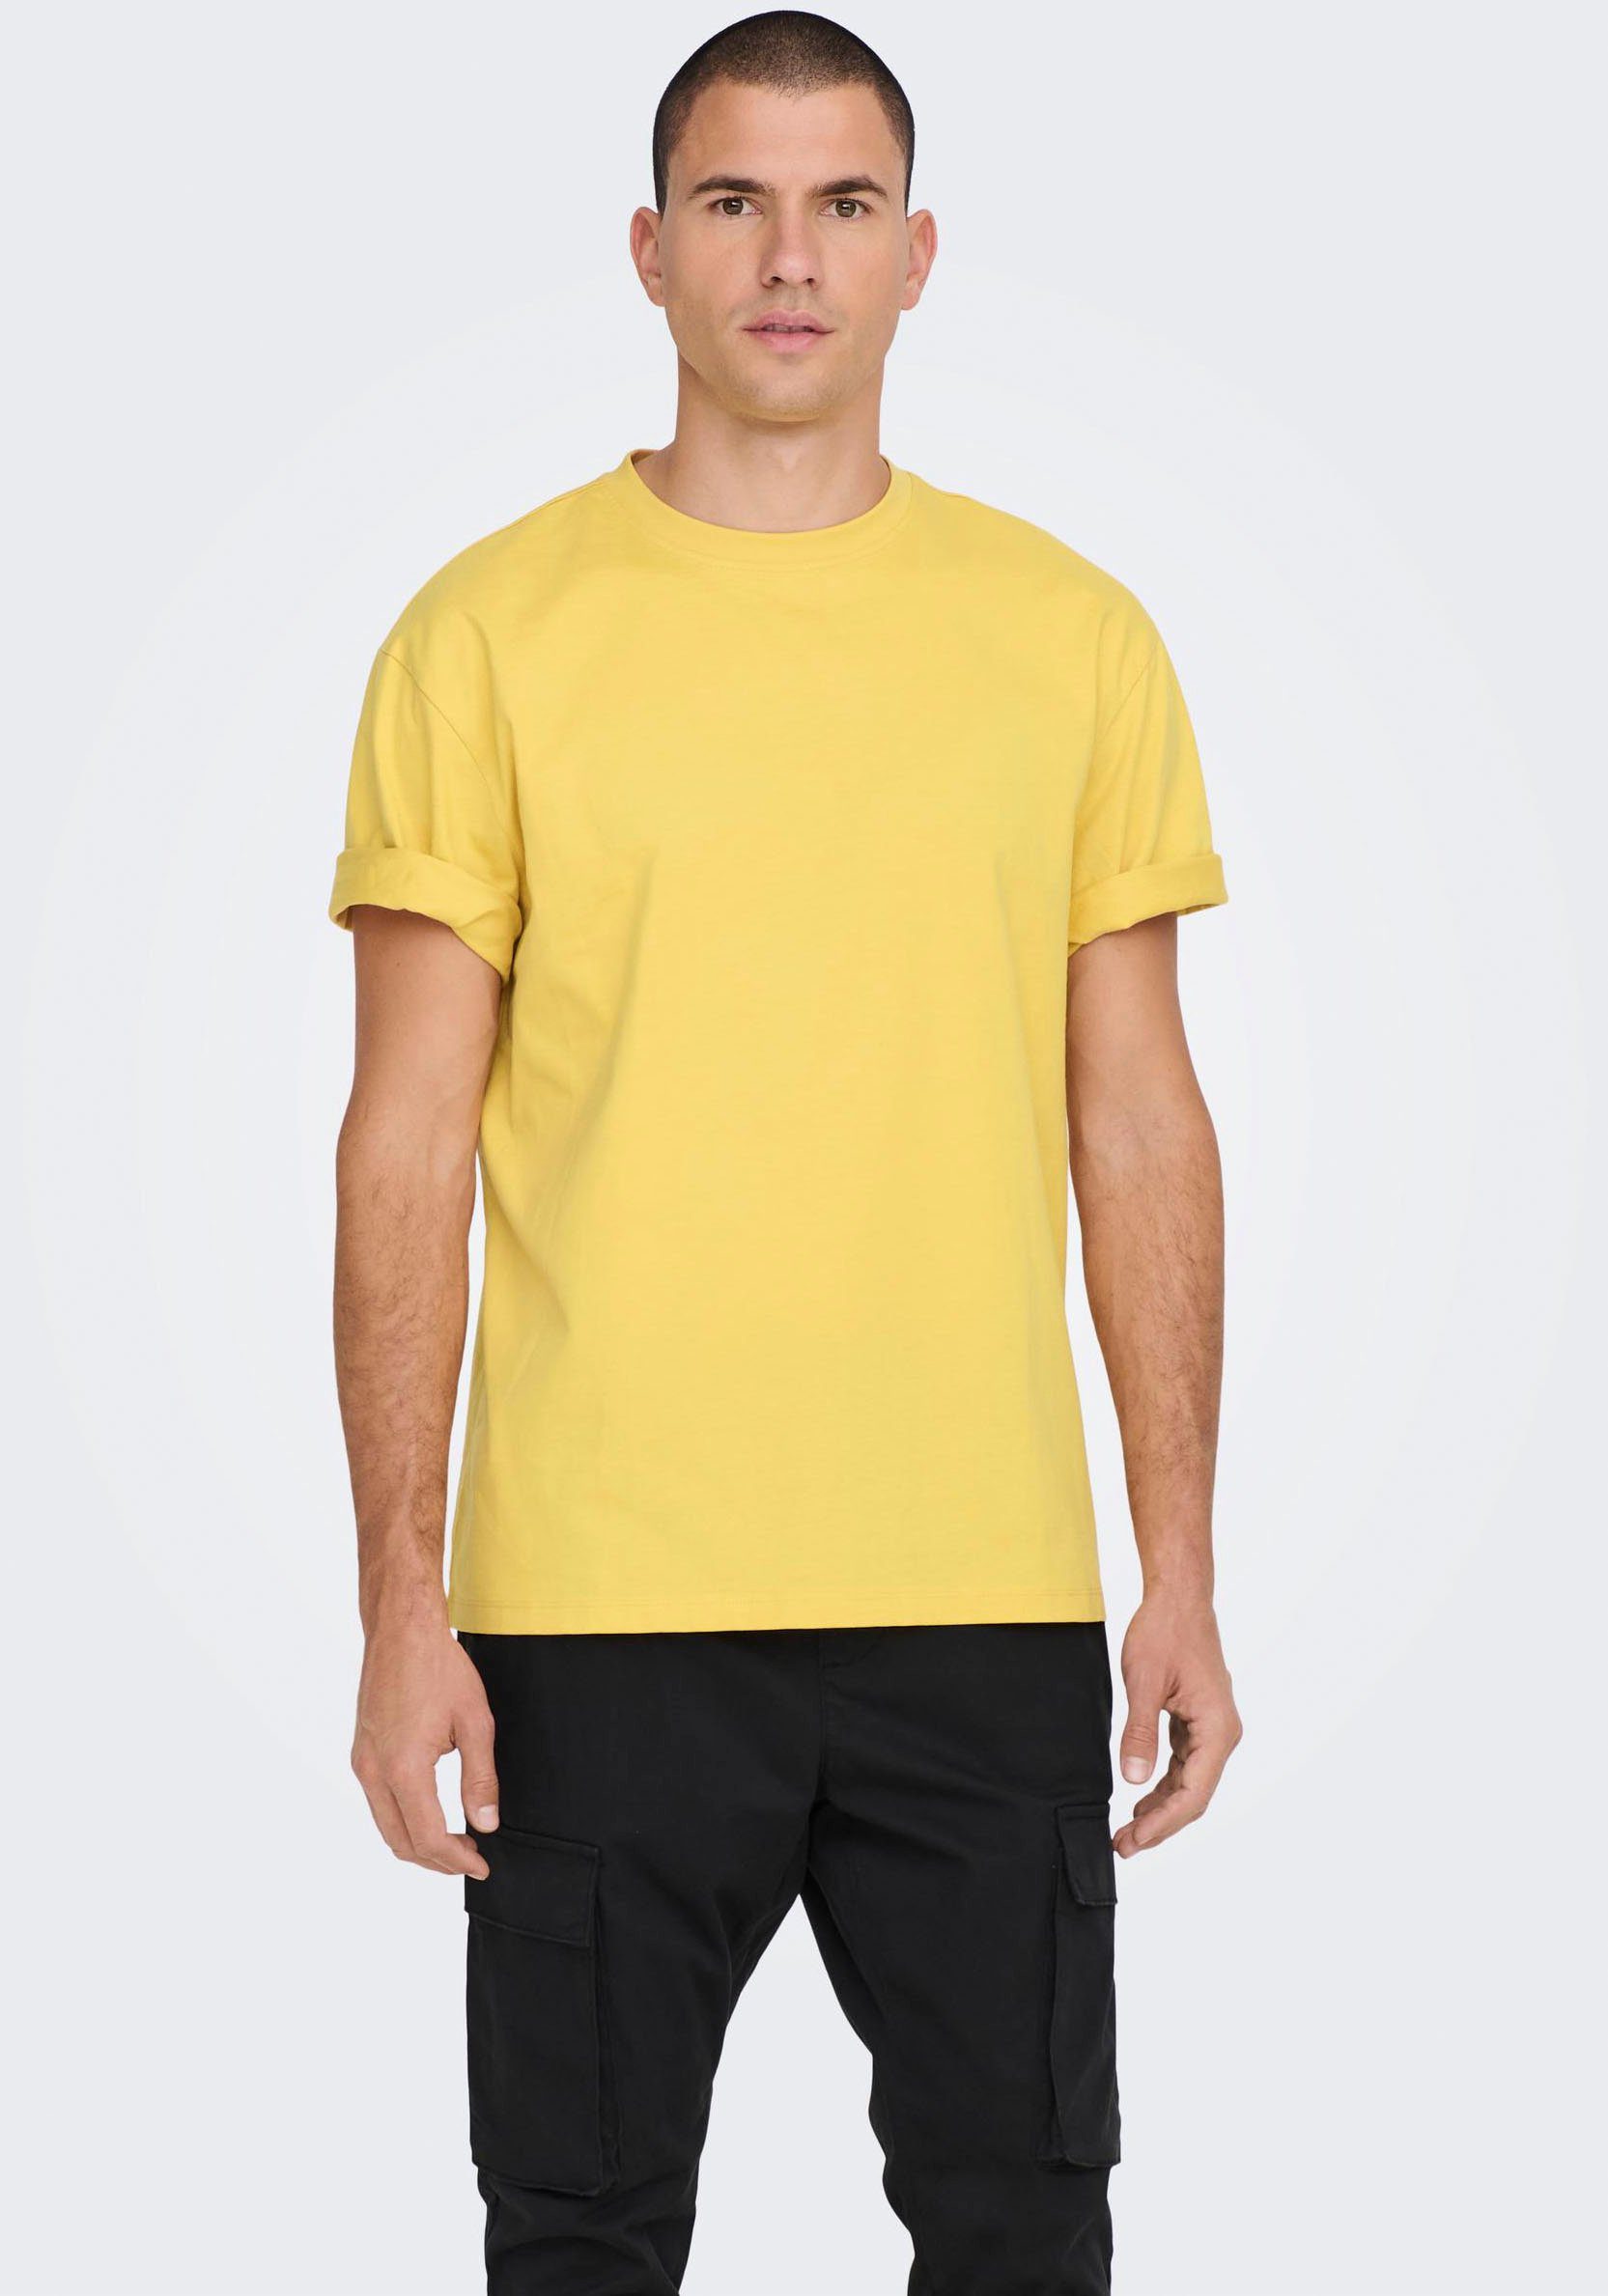 ONLY & SONS T-Shirt FRED ochre